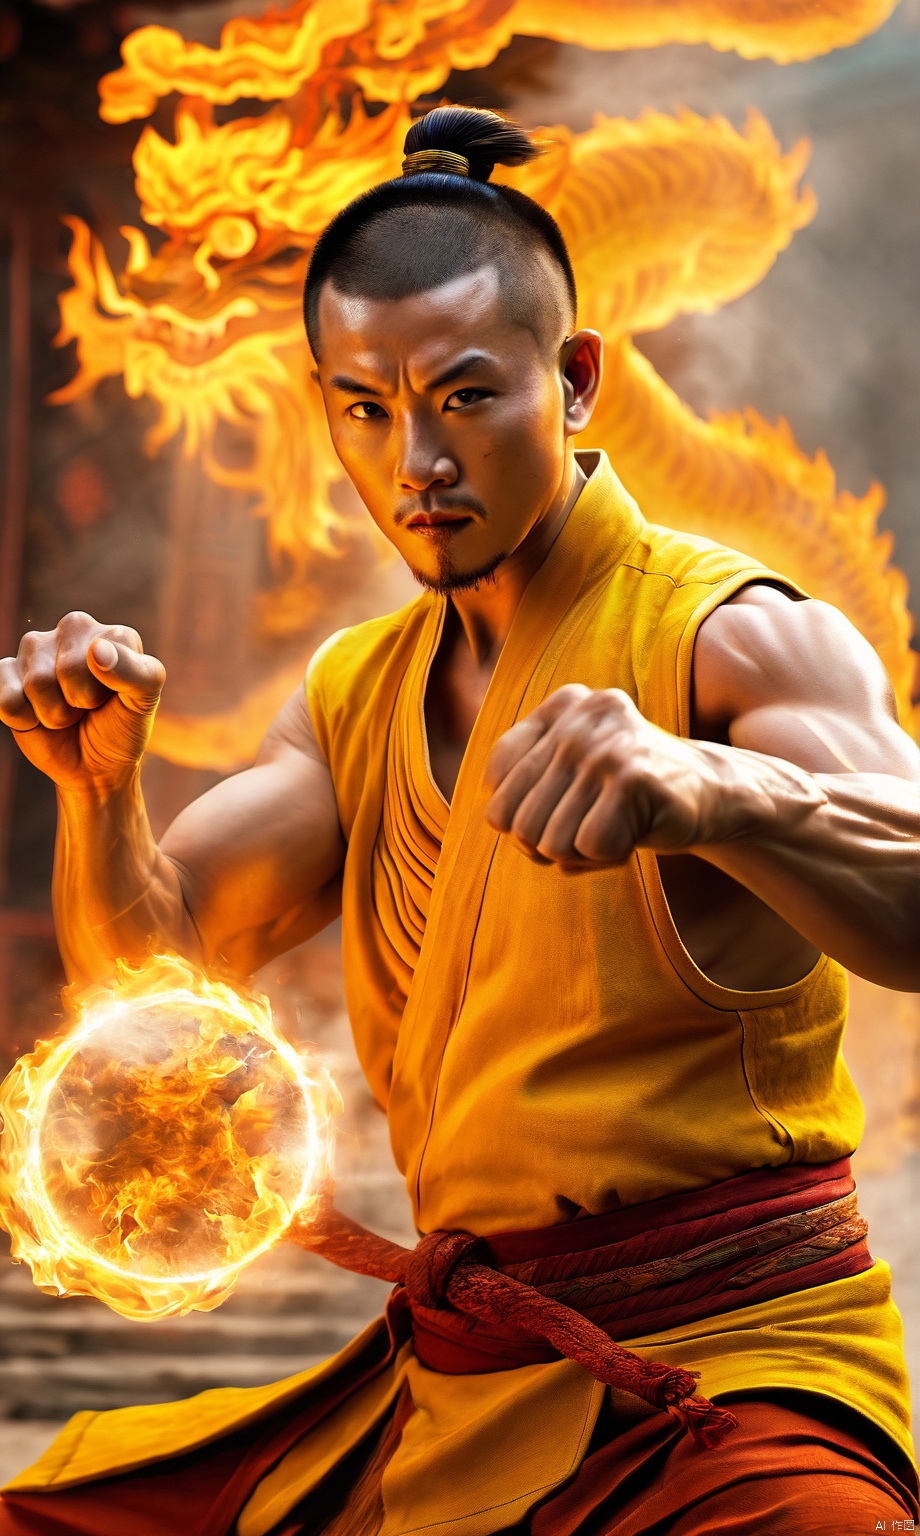  award wining professional full body fantasy portrait of fitness Chinese monk,third eye on the front:1.5),a fire dragon emerges from his fist,fire tiger,Chinese ancient style,kung-fu stance,tanned sweat realist detailed skin,imminent fight,raging opened mouth detailed face,chi,ultra detailed burning hands and fingers,high quality burning hands and fingers,(clenched fists radiate yellow light from within, transparent fist skin, veins, bones:1.6),( power aura, aura of power, distorted air around him:1.6),motion blur,movie shot,photo realism,Movie Still,Film Still,Cinematic,Cinematic Shot,Cinematic Lighting,forgotten Buddhist temple background,crazy details,movie grain,ultra high definition,cg rendering,volume lighting,unreal engine,

,Movie Still,